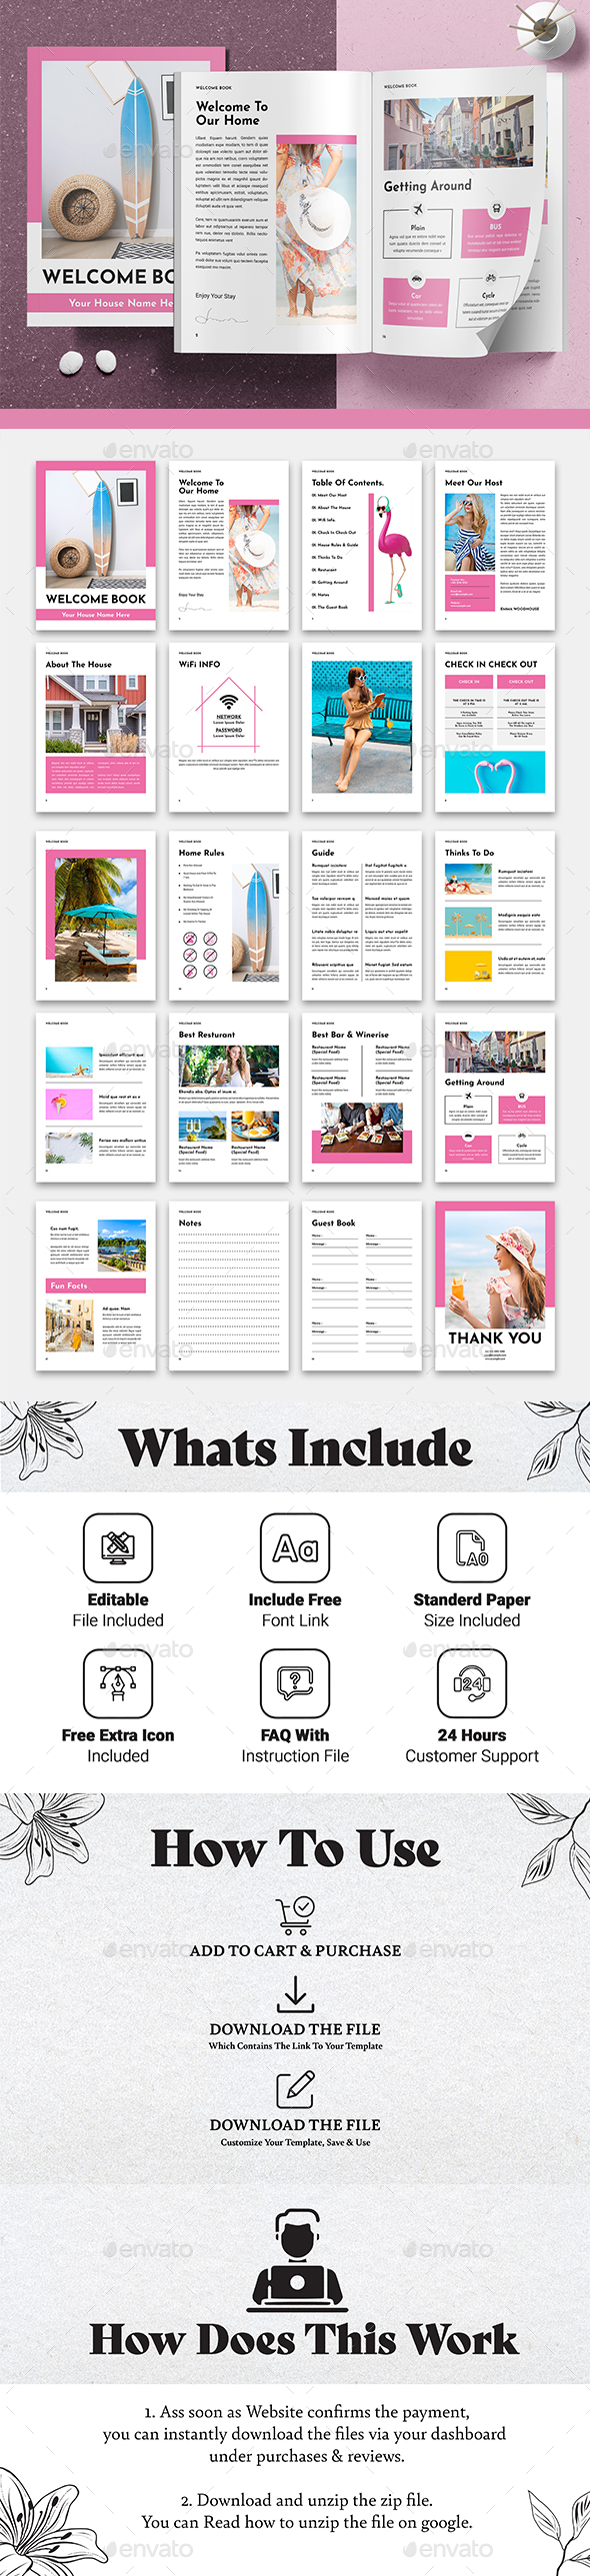 Welcome Book Template